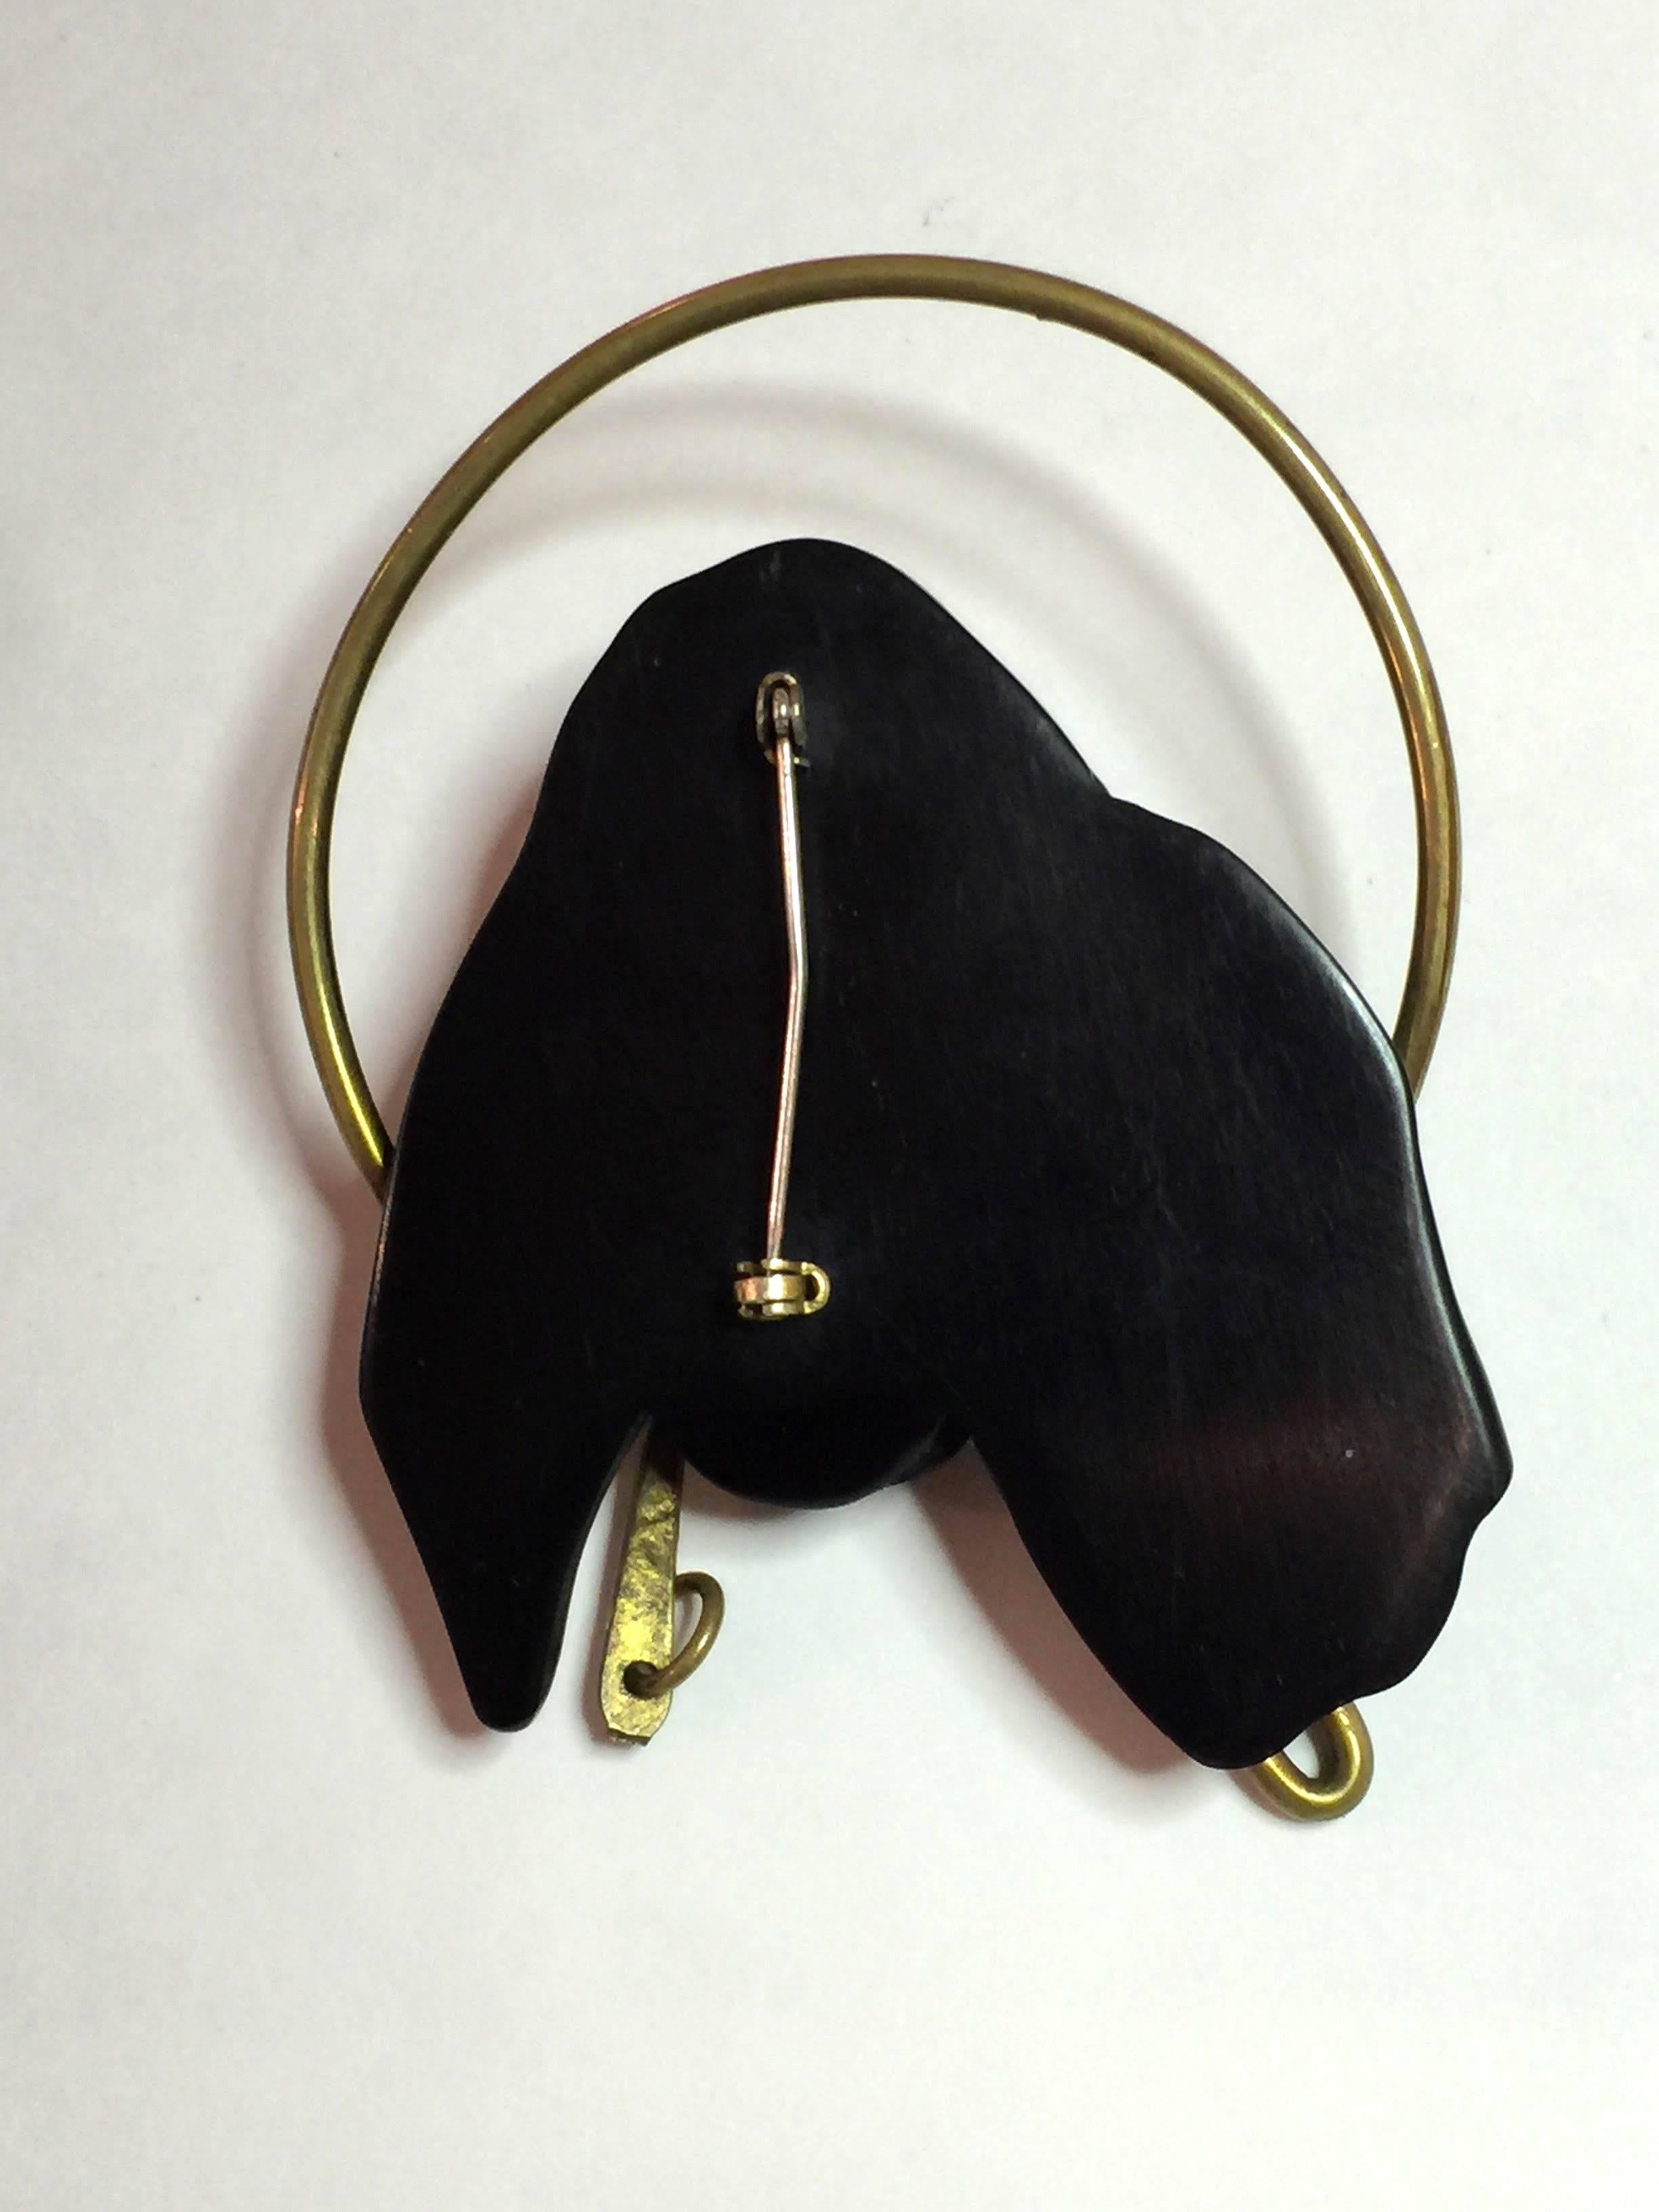 A rarity indeed, this 1930s  Black Bakelite DOG with Brass Leash in Mouth Brooch Pin, is part of a series of pins utilizing heavy gage brass wire for decorative effect and accent in unusual bakelite brooches. A wonderful hound with floppy ears and